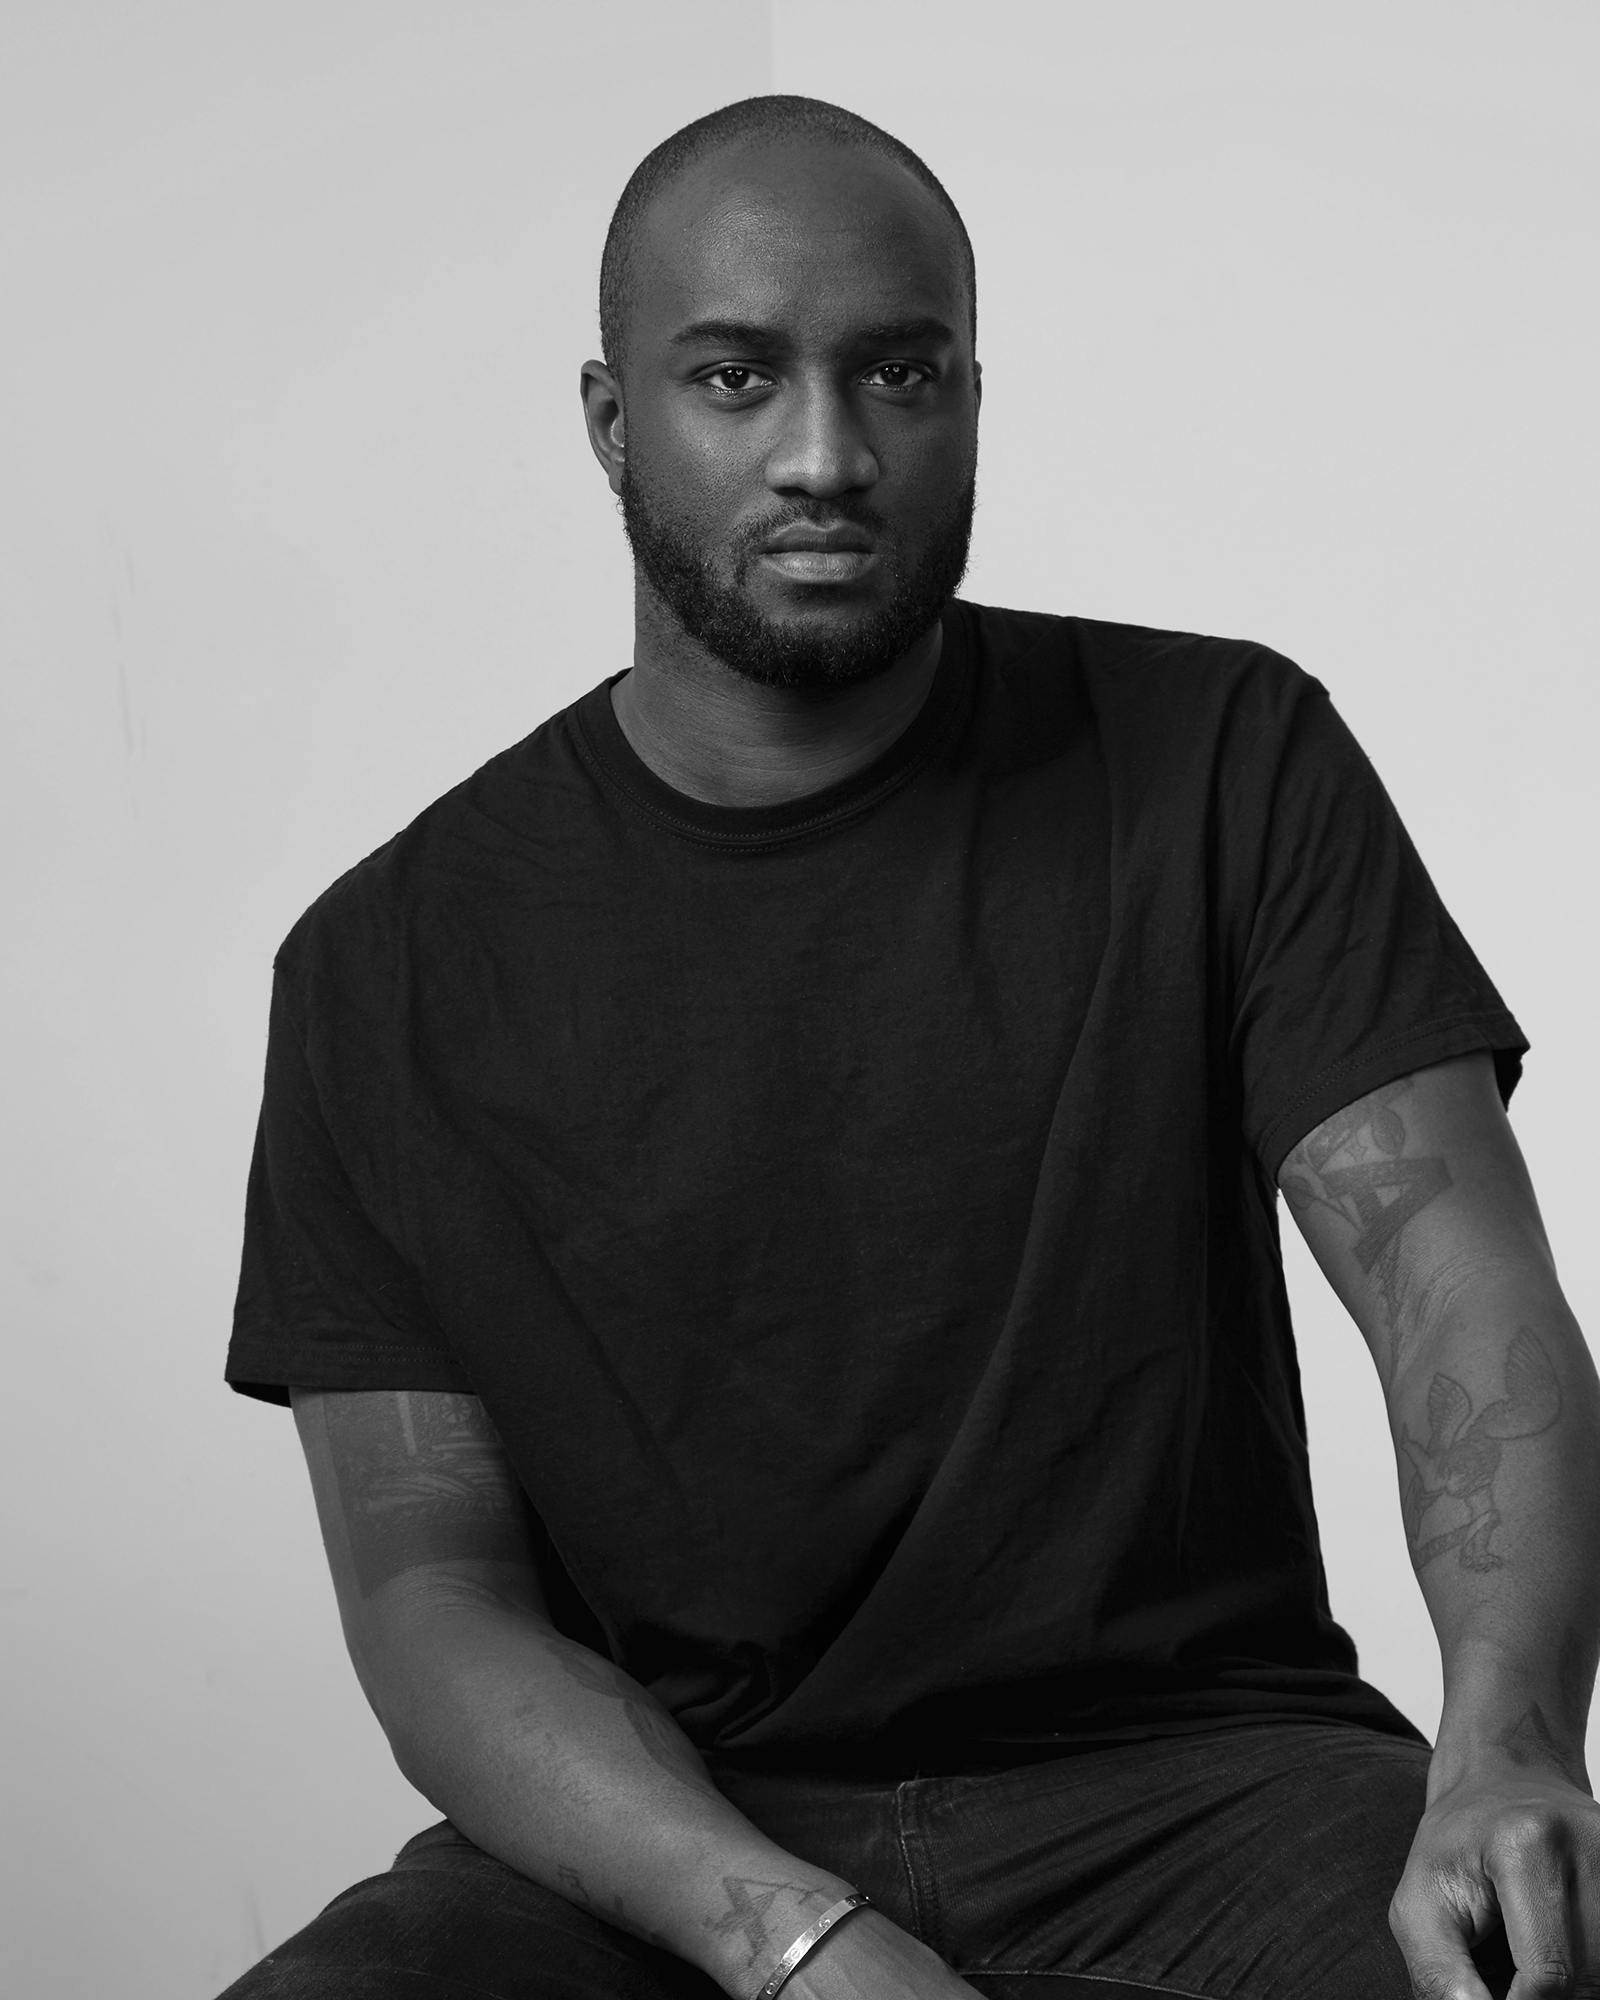 In Brooklyn, Virgil Abloh's Architectural Legacy on Display